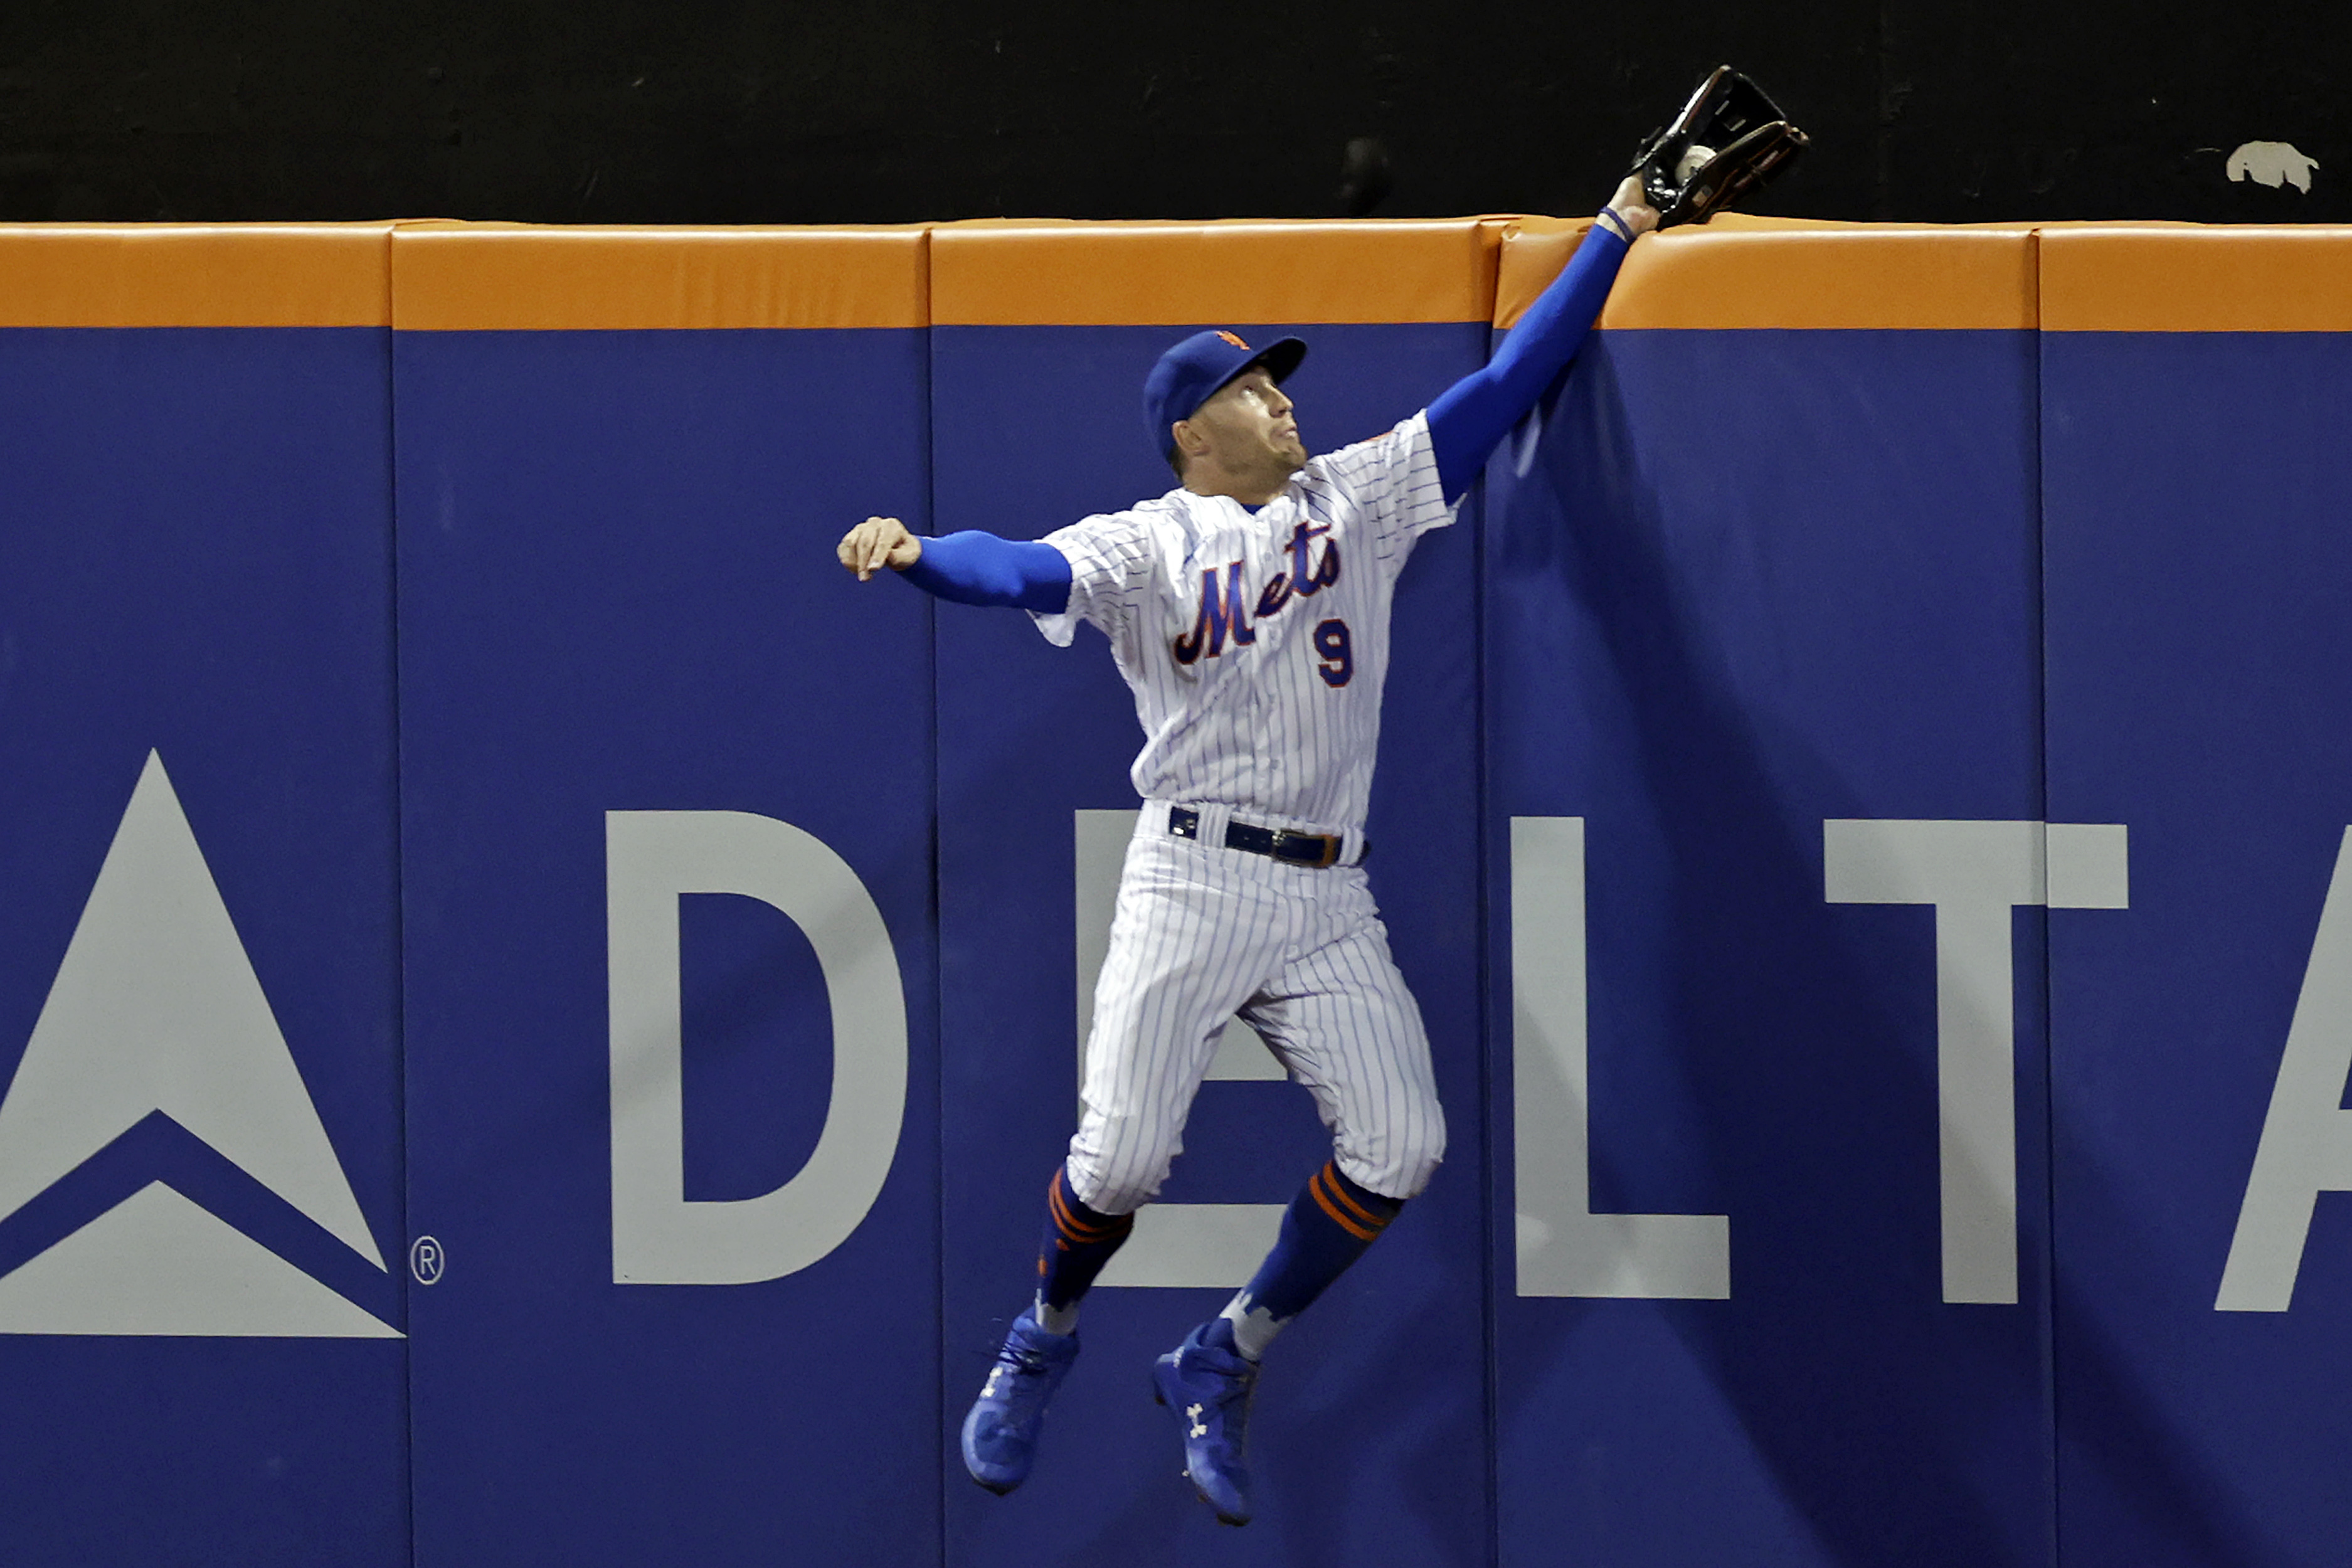 Timmy Trumpet plays horn, Nimmo saves Mets in 2-1 win vs LAD